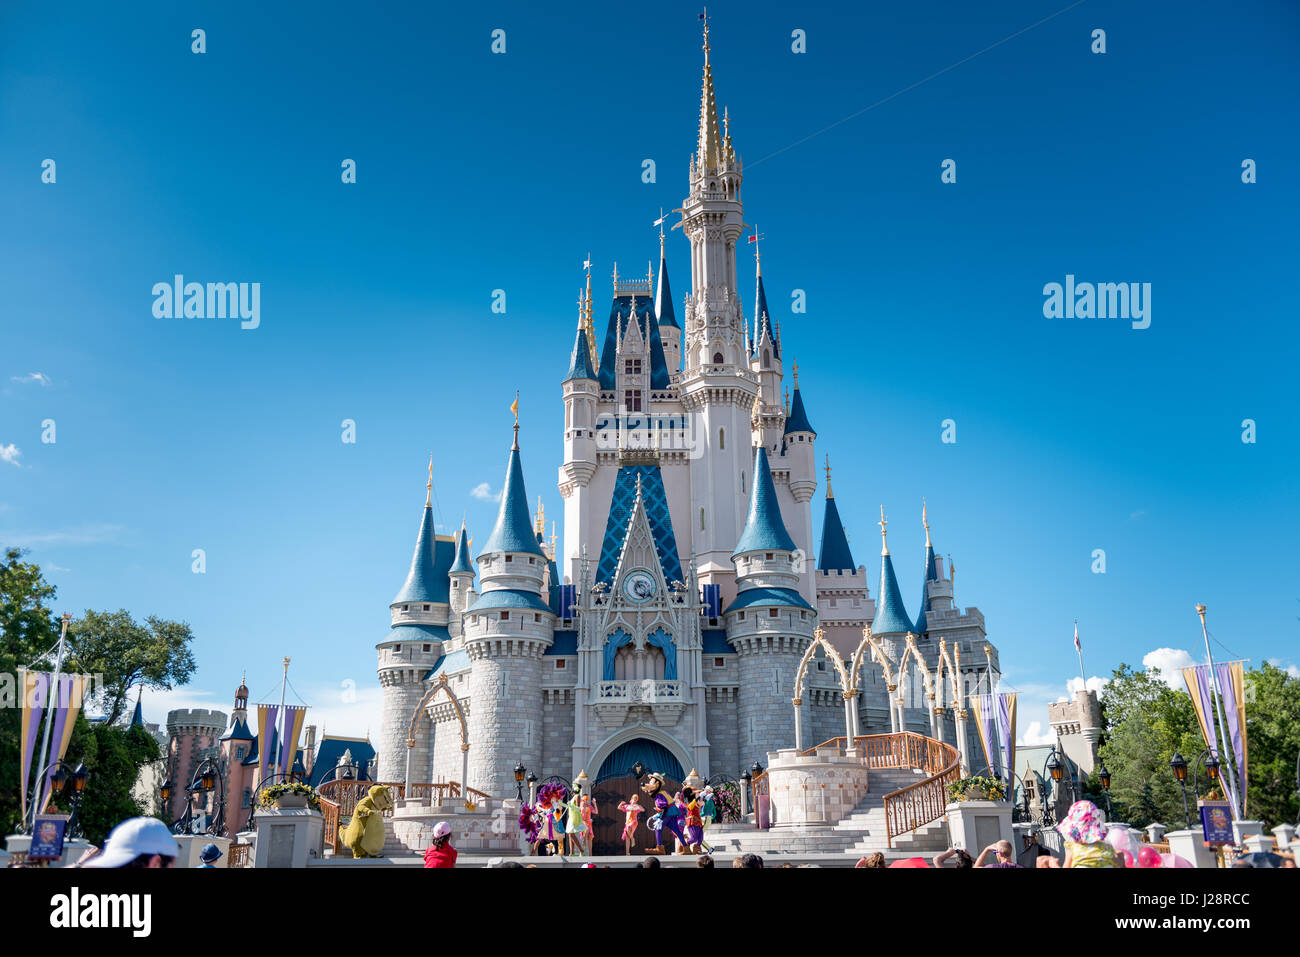 Mickey and friends performs in front of Cinderella Castle in Magic Kingdom, Disney World. Stock Photo